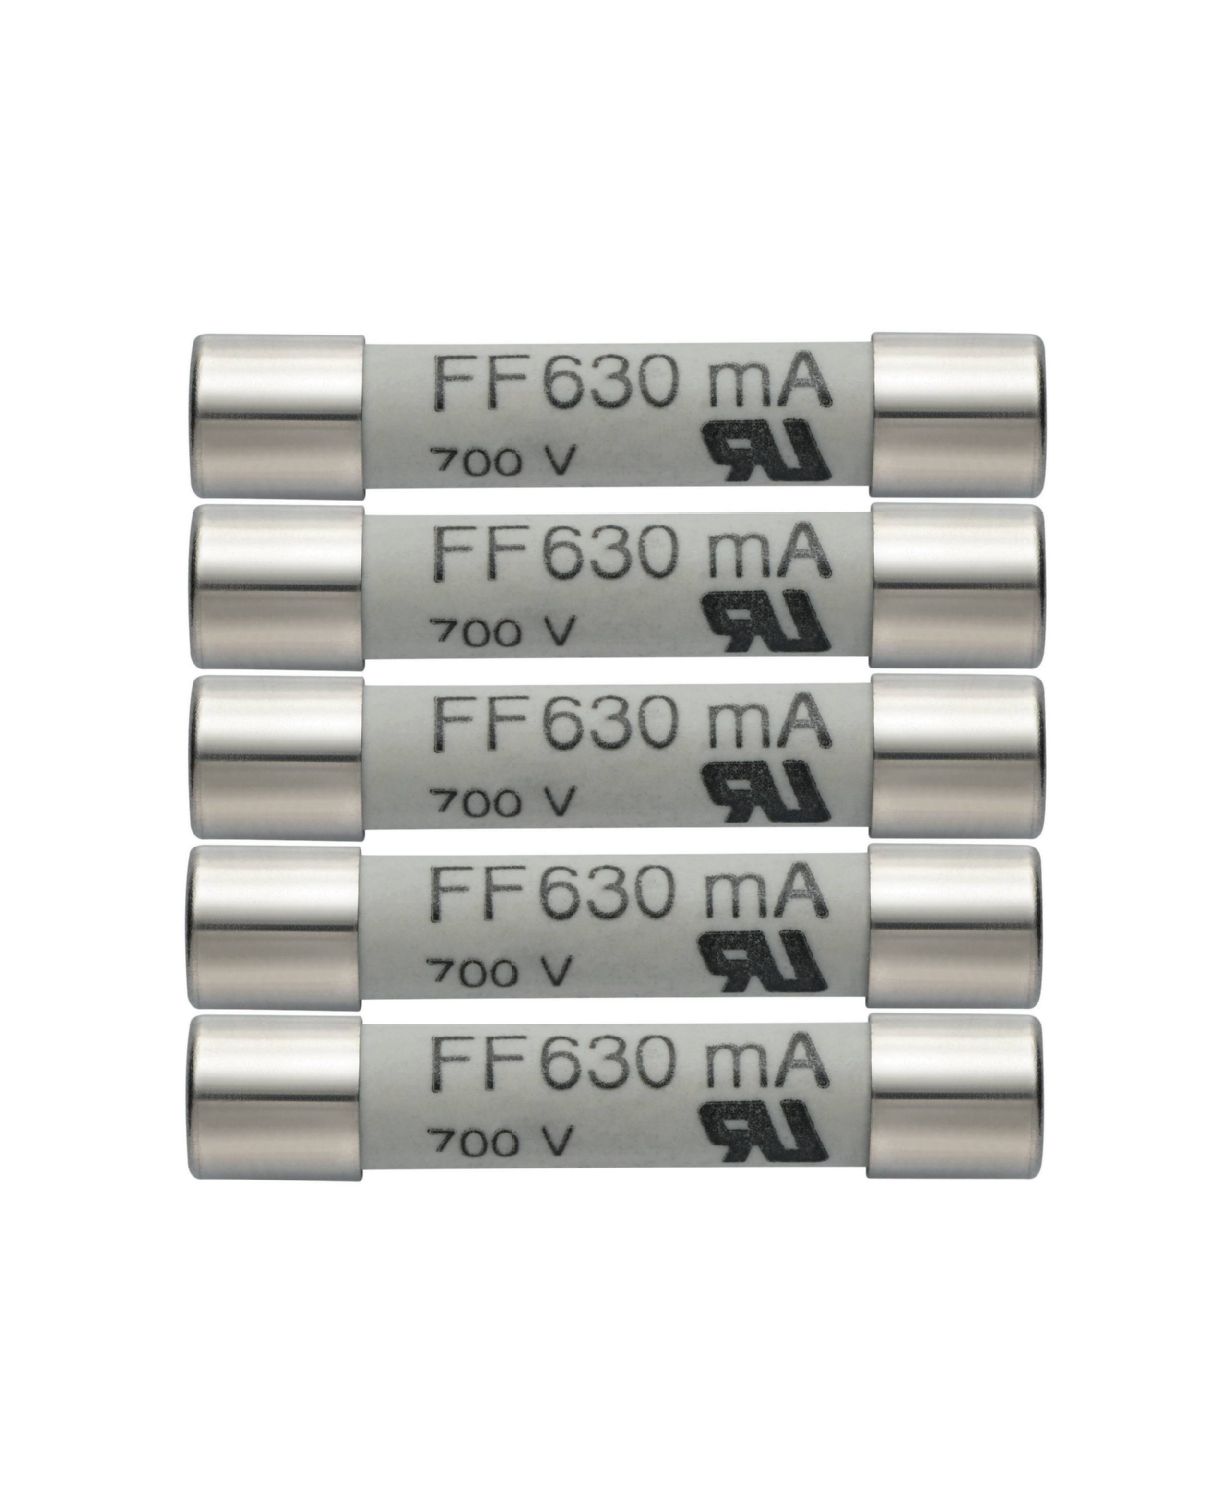 Spare630mA/600Vfuses-5items